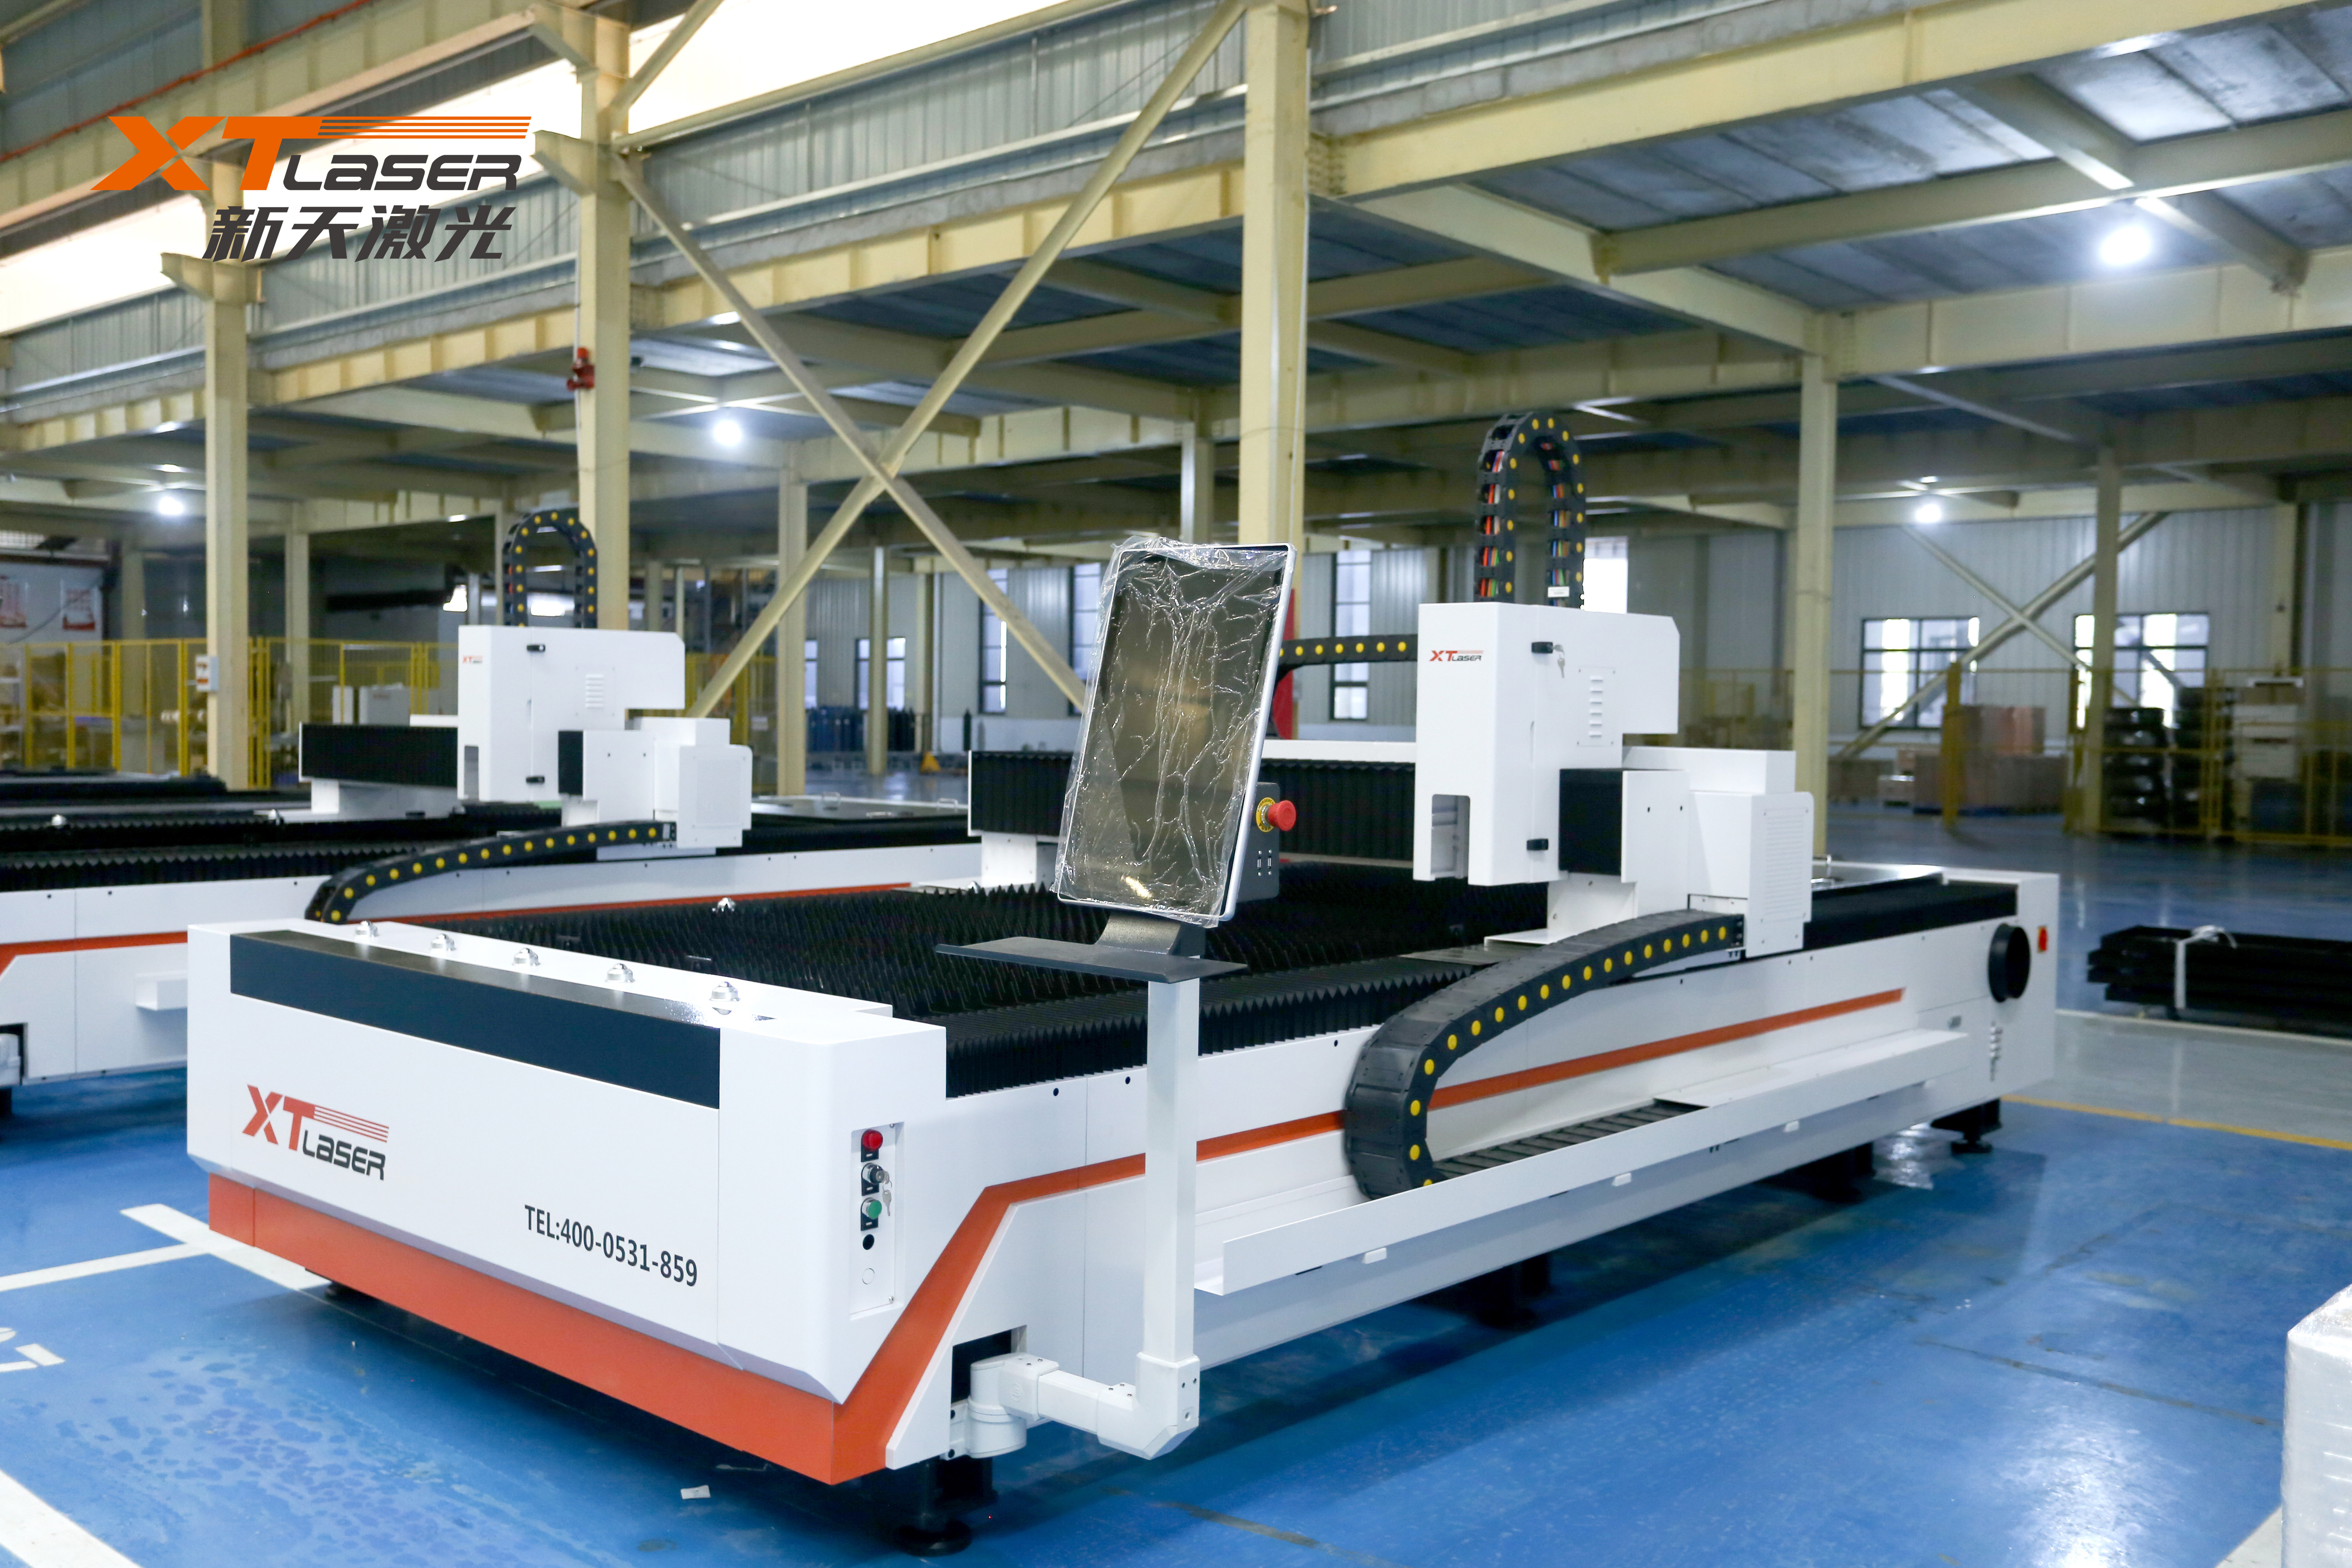 Fiber laser cutting machines lead China's manufacturing industry